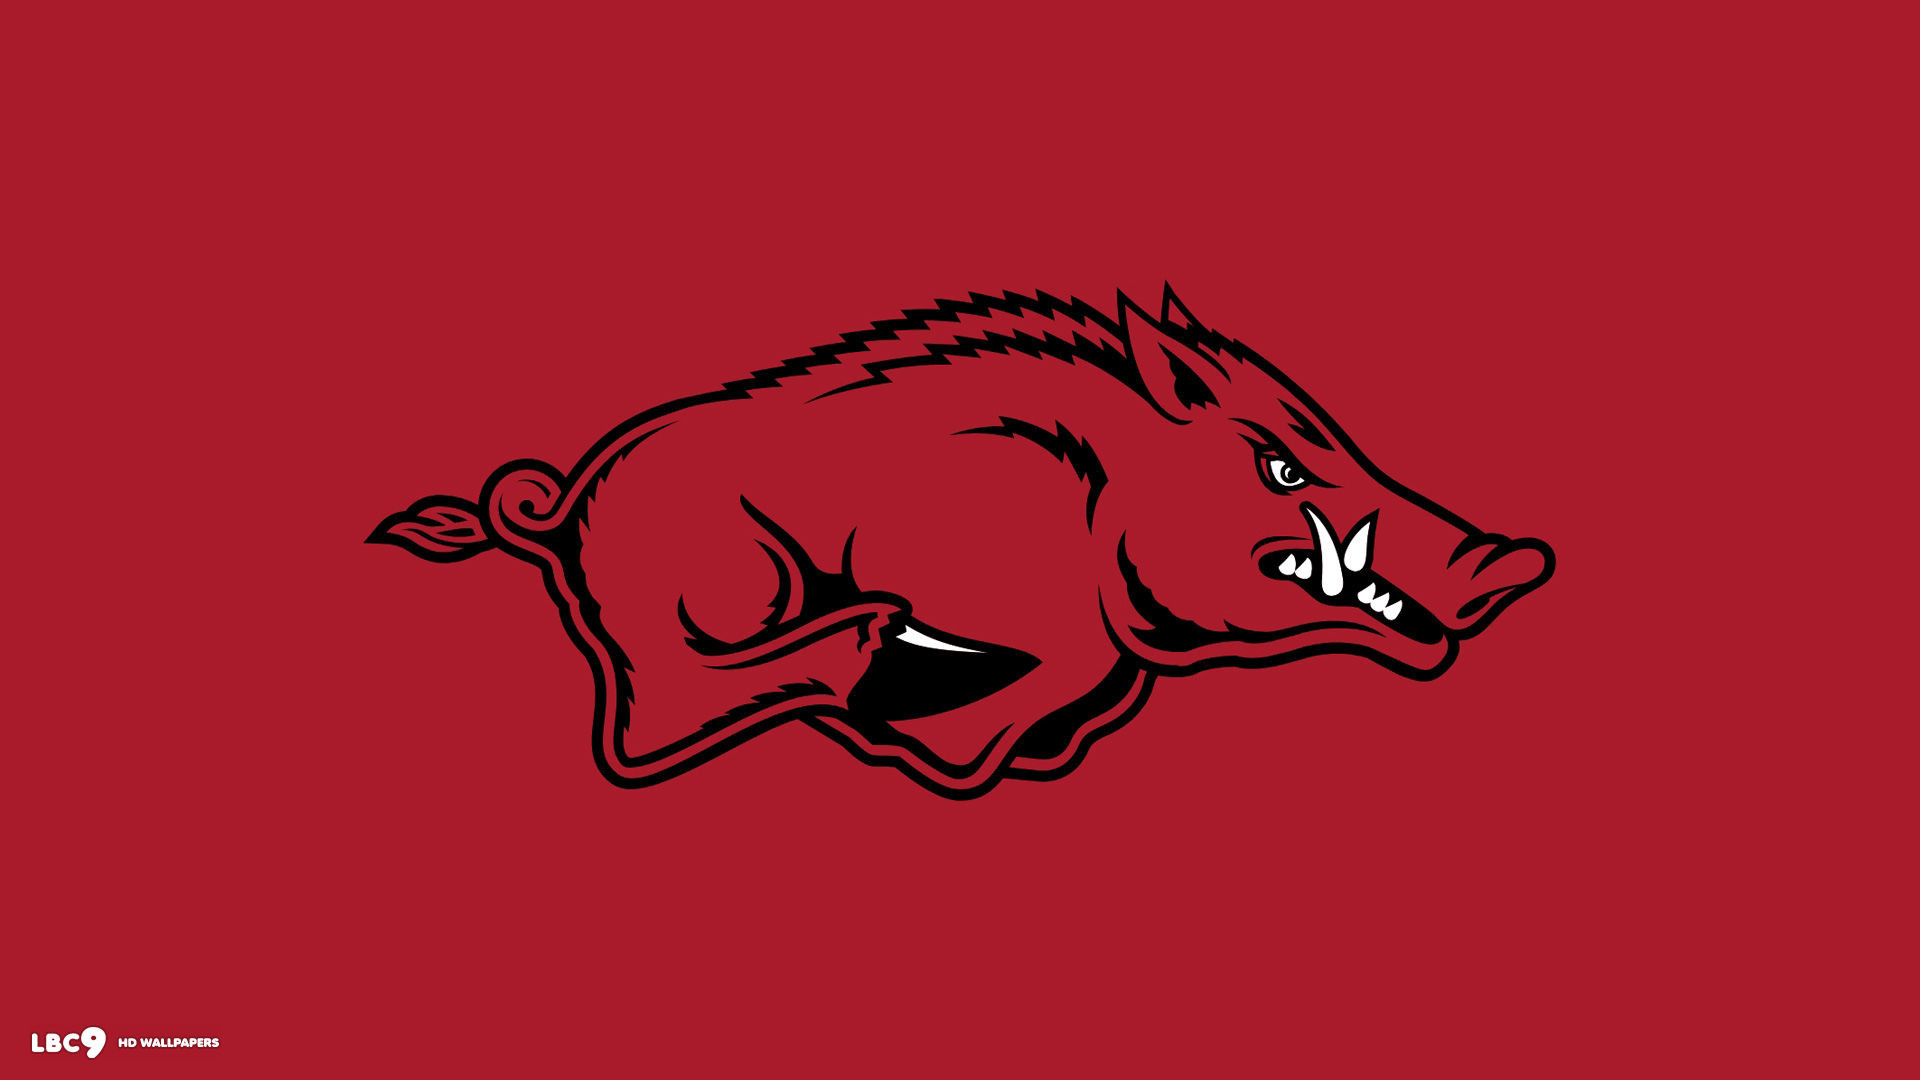 Awesome wallpaper that I hope we get more of  rrazorbacks